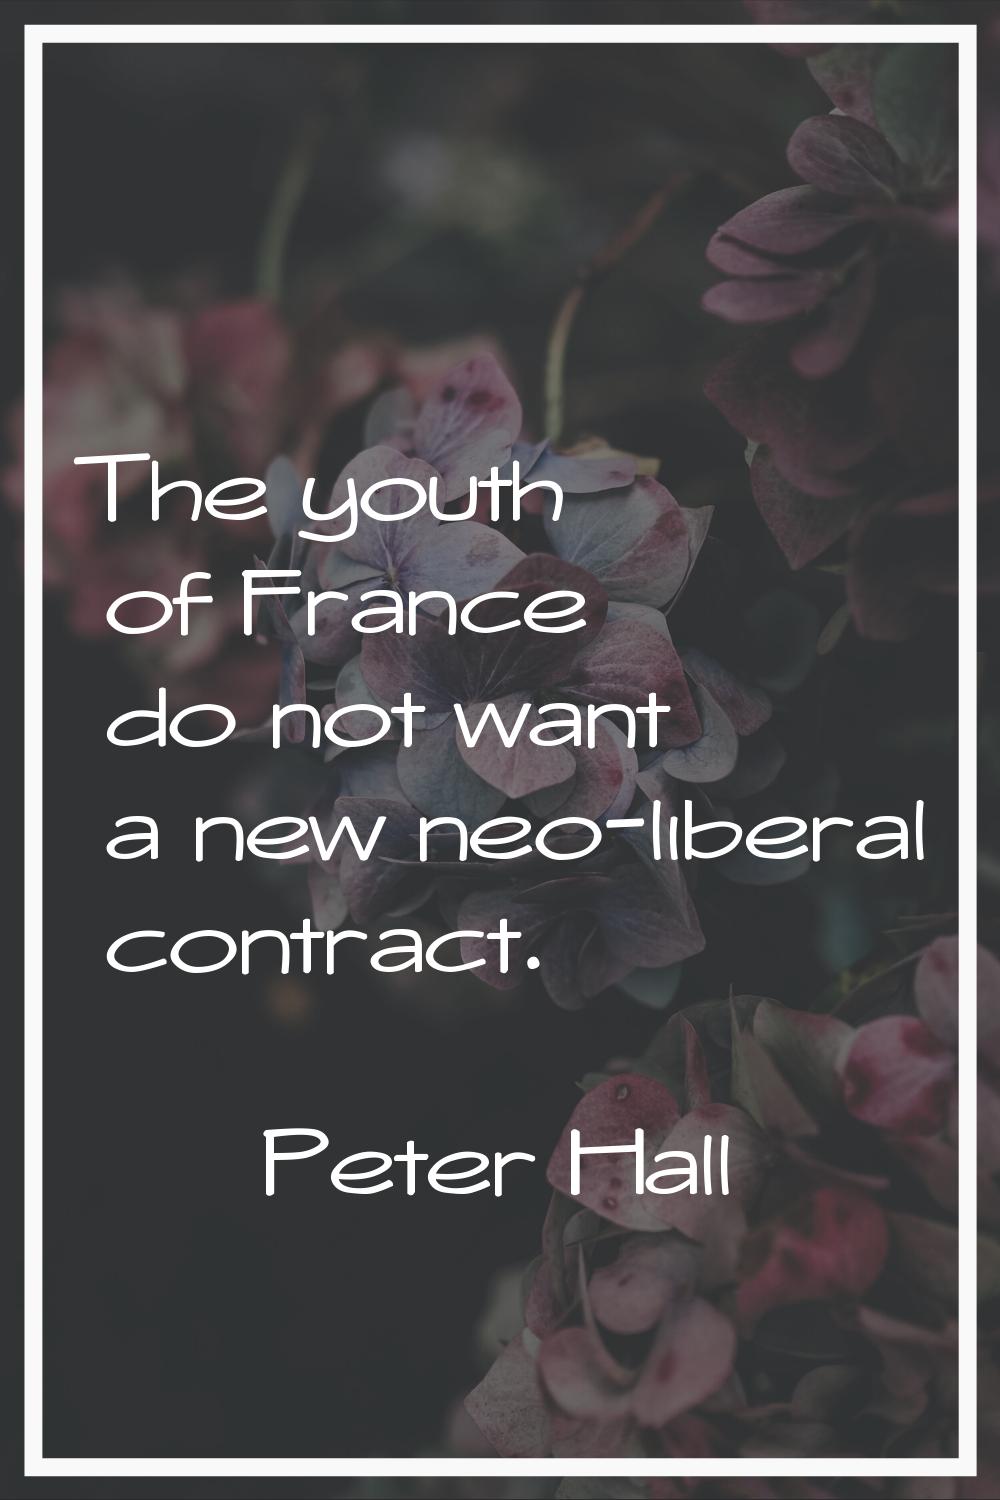 The youth of France do not want a new neo-liberal contract.